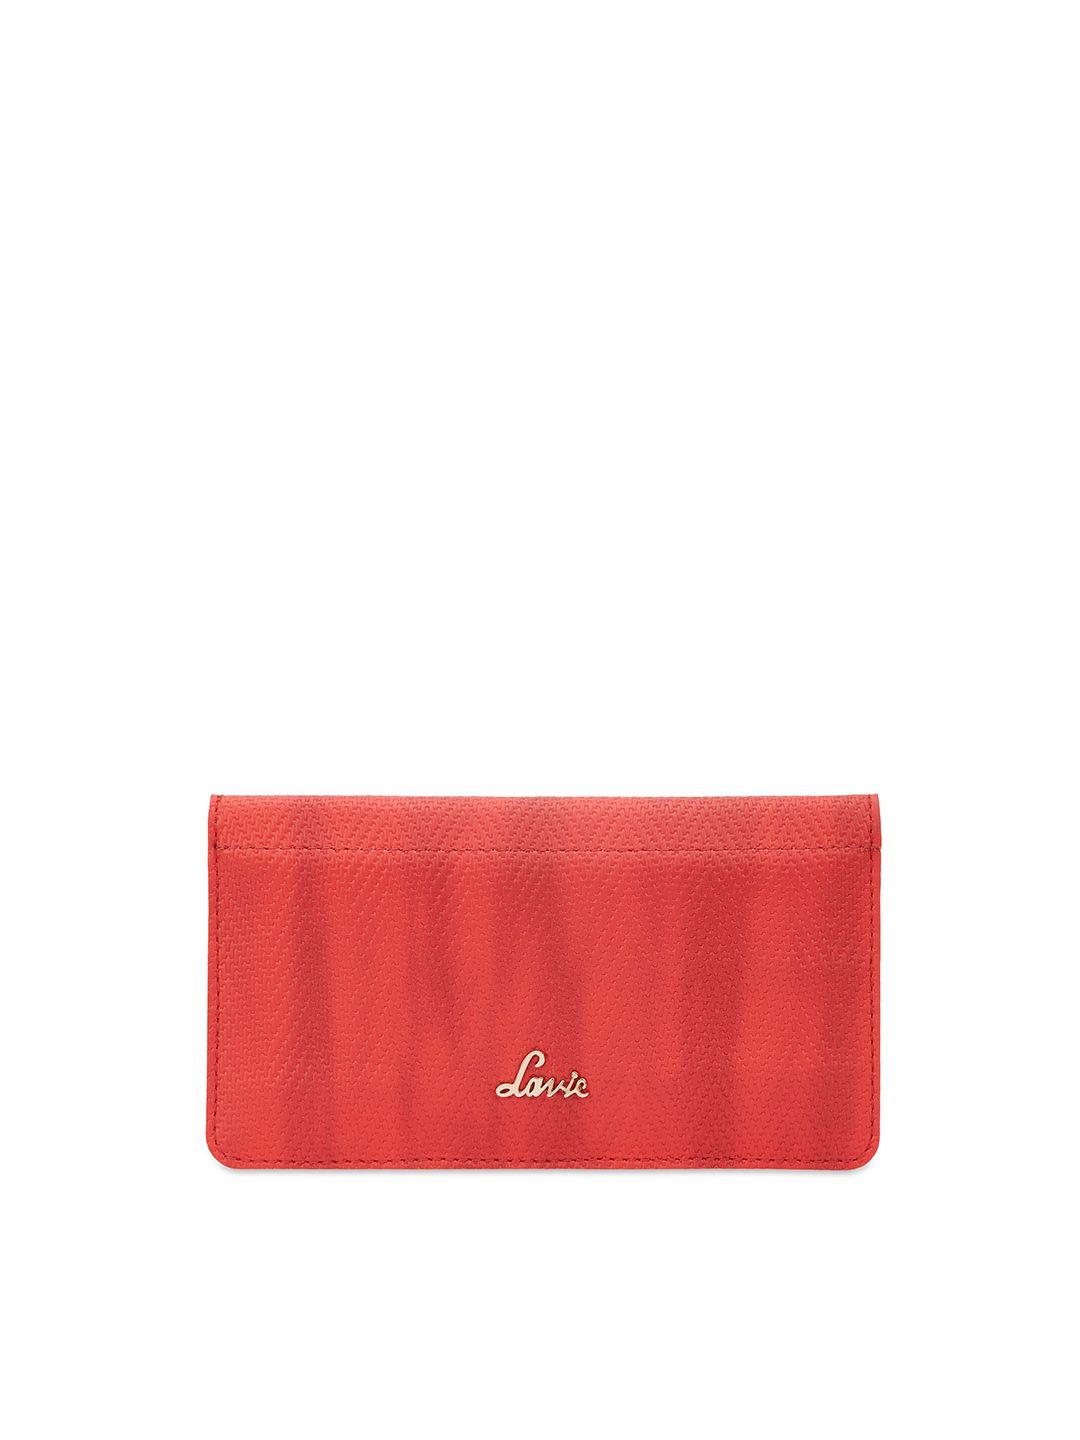 lavie-women-textured-synthetic-leather-two-fold-wallet